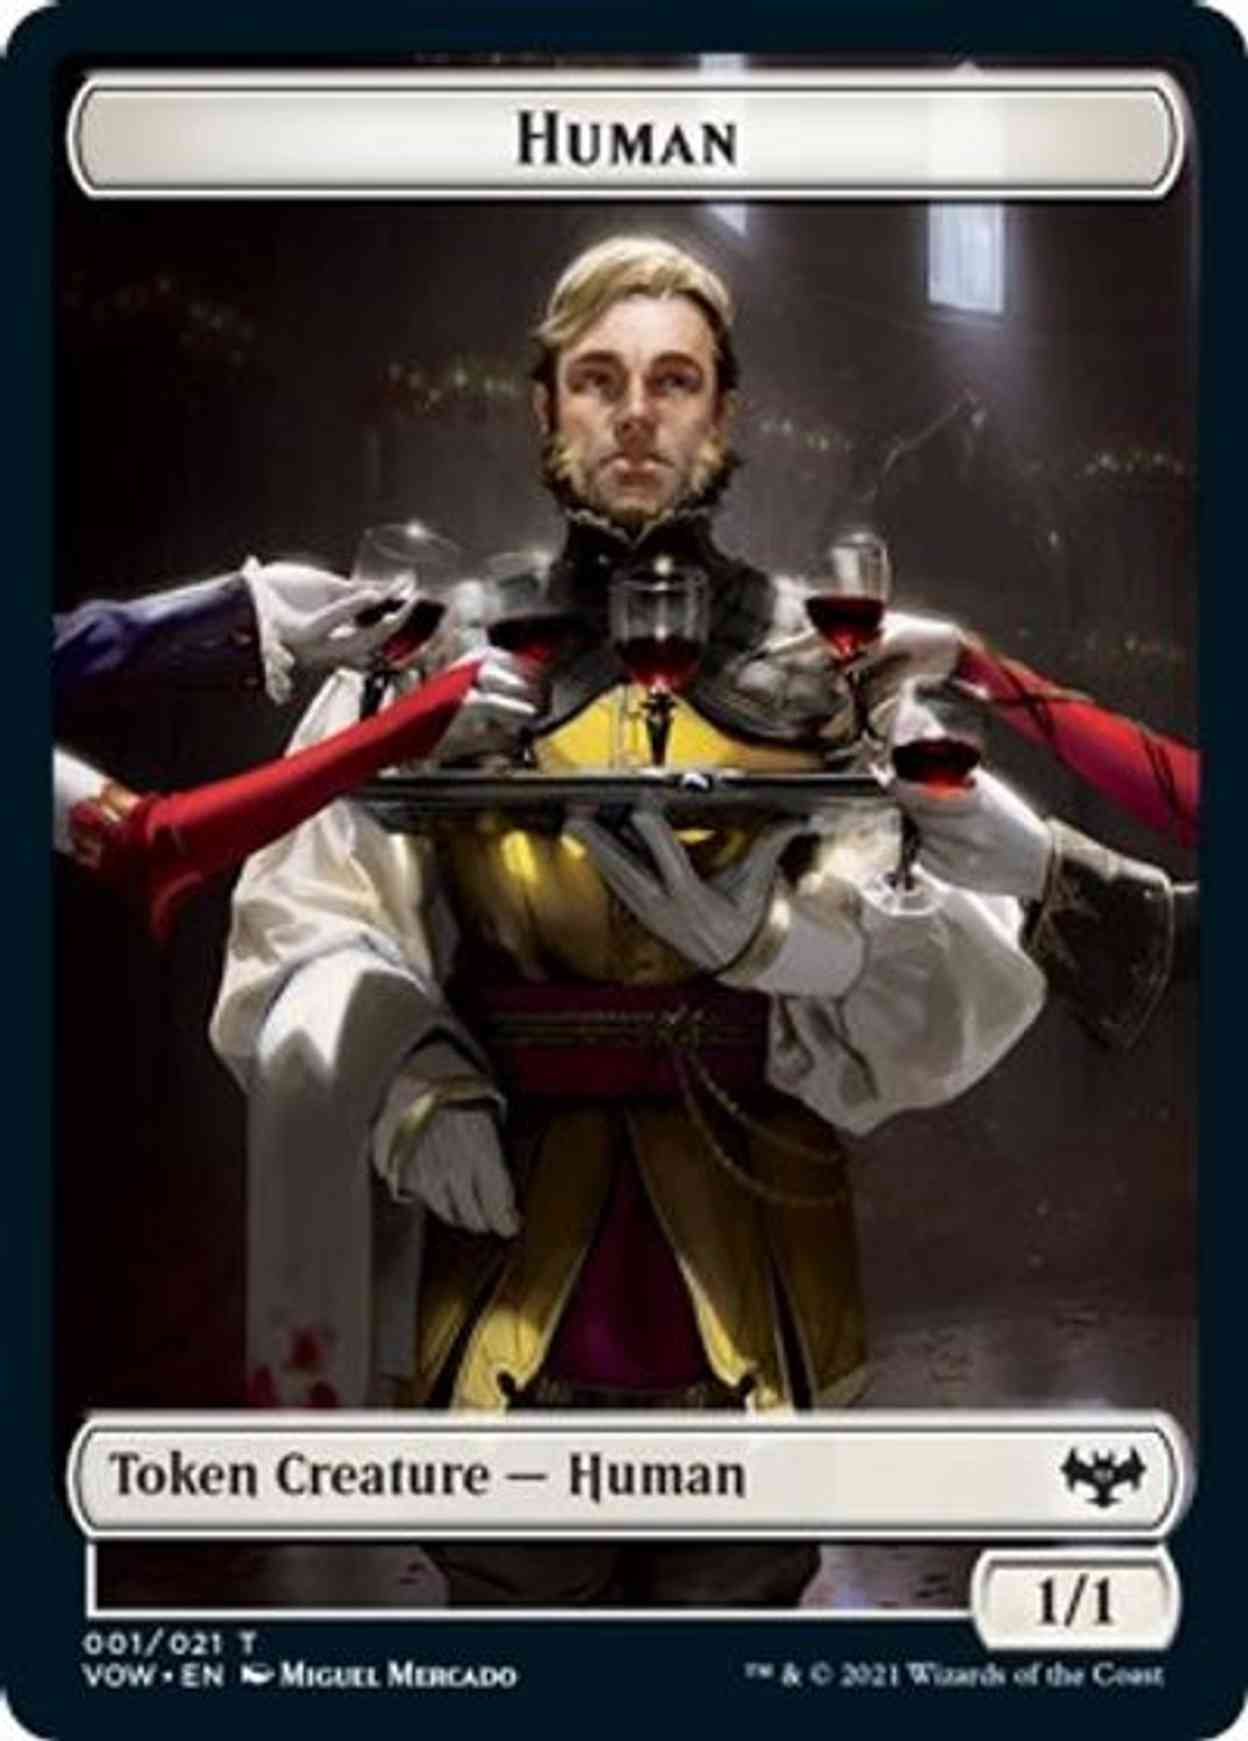 Human (001) // Human Soldier Double-sided Token magic card front